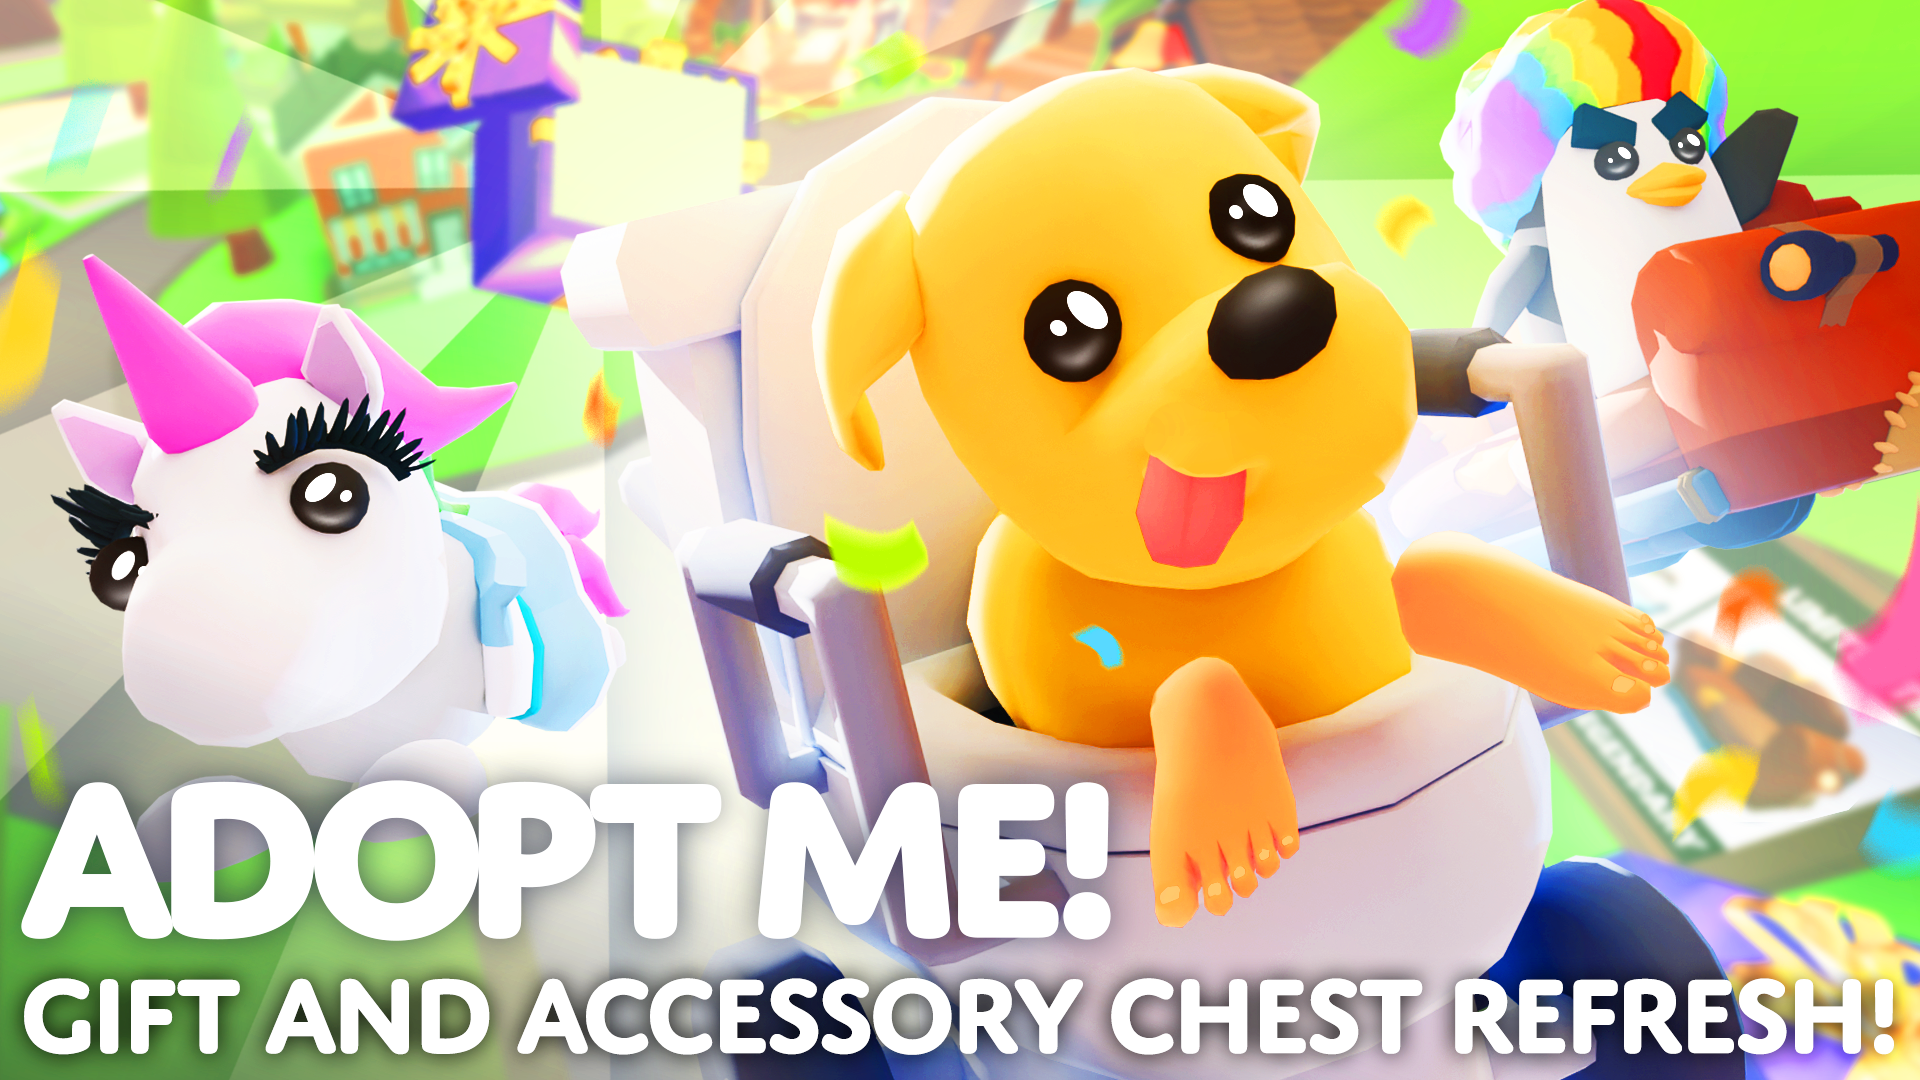 Welcome to the Gift and Accessory Chest Refresh update in Adopt Me! Dog in a toilet stroller with human feet attached, Unicorn with unfortunate eyelashes on, and a Penguin with the clown wig. 